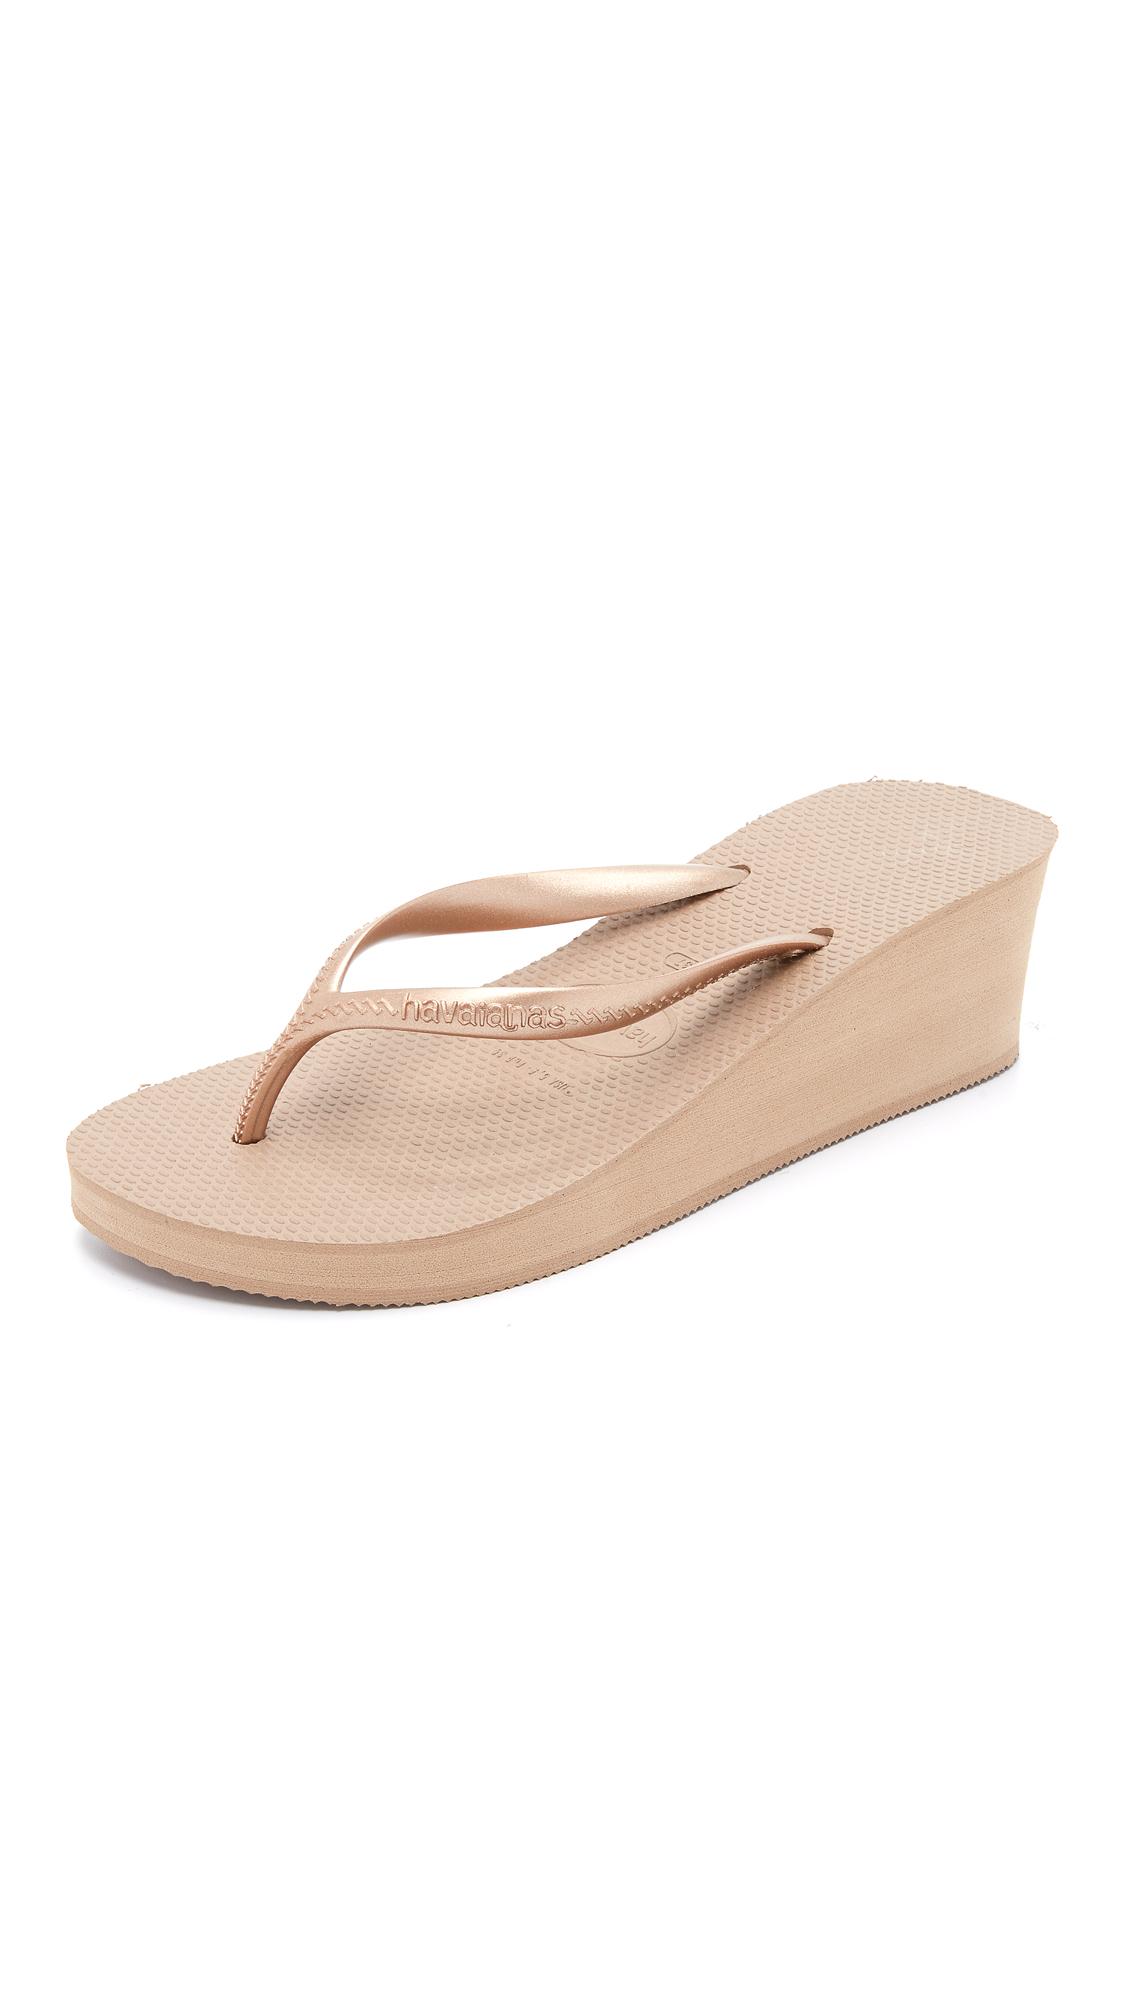 Havaianas High Fashion Wedge Sandals in Pink | Lyst